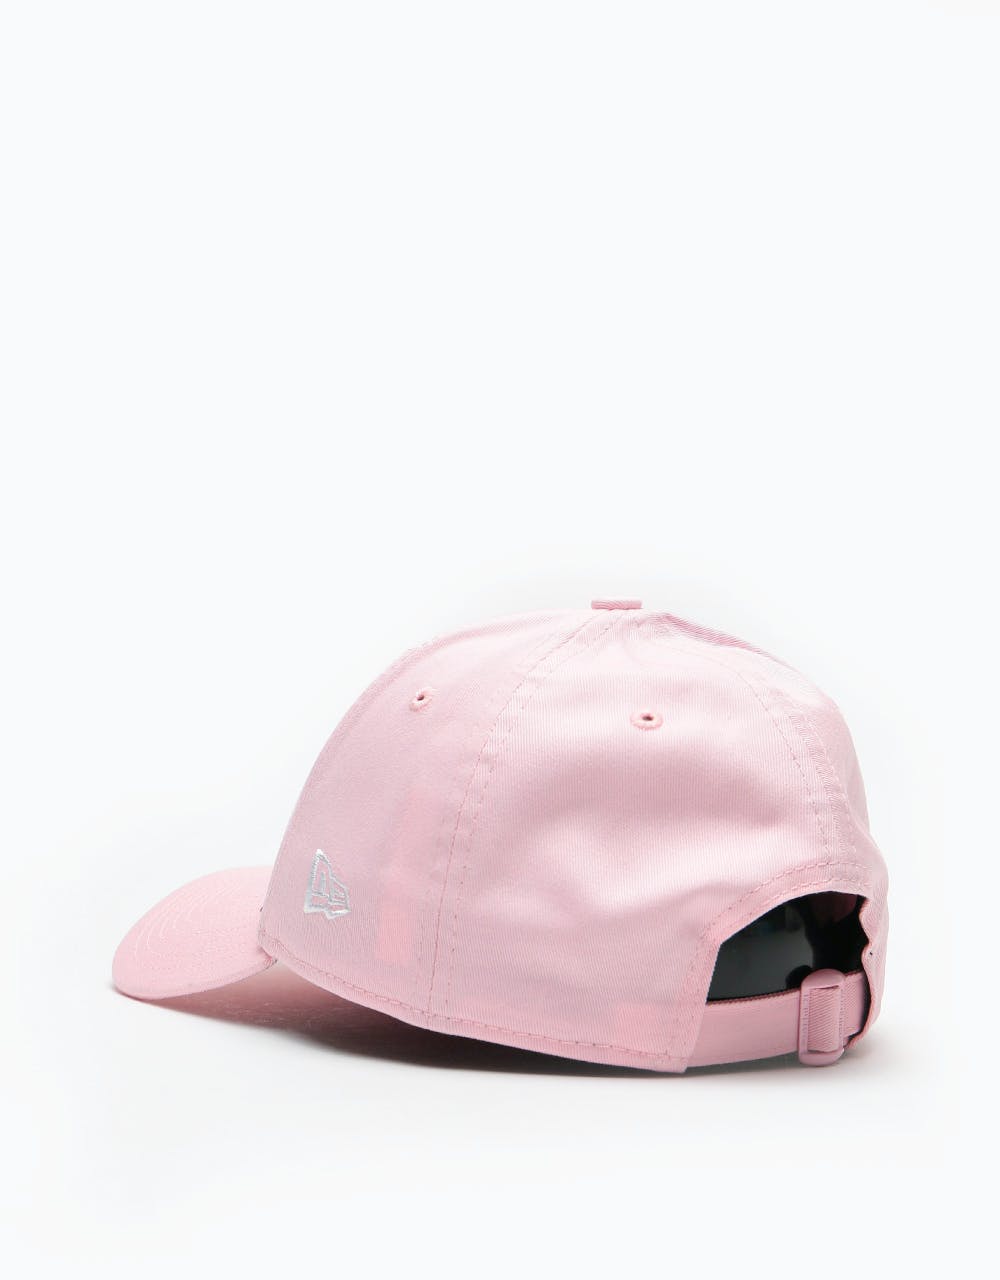 New Era 9Forty Boston Red Sox League Essential Cap - Pink/White